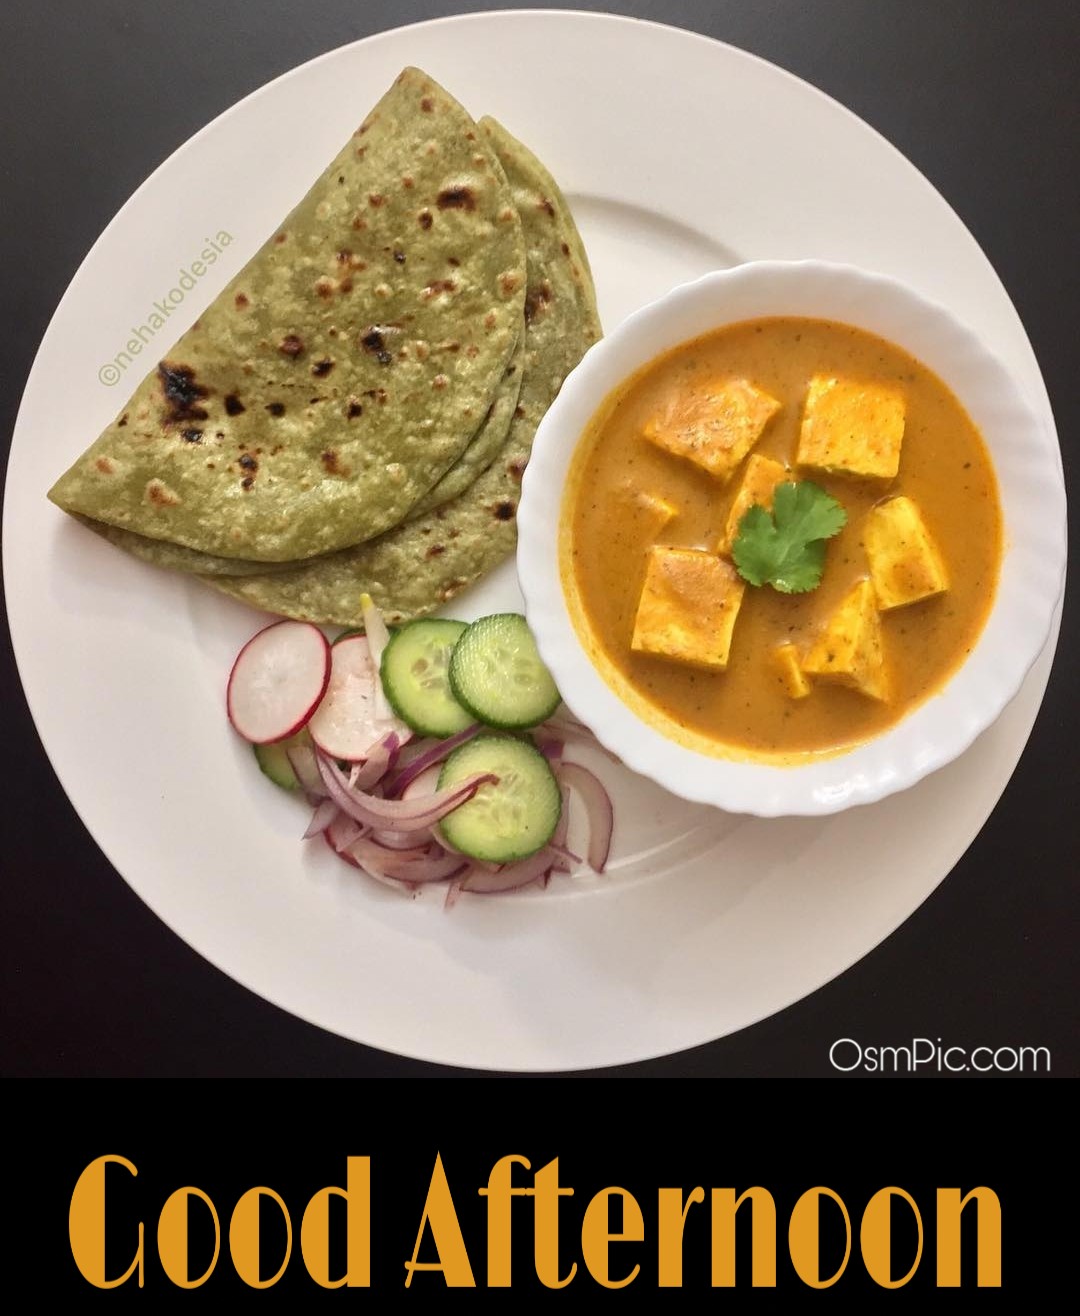 44 Good Afternoon Indian Lunch Images Download Afternoon Lunch Pics